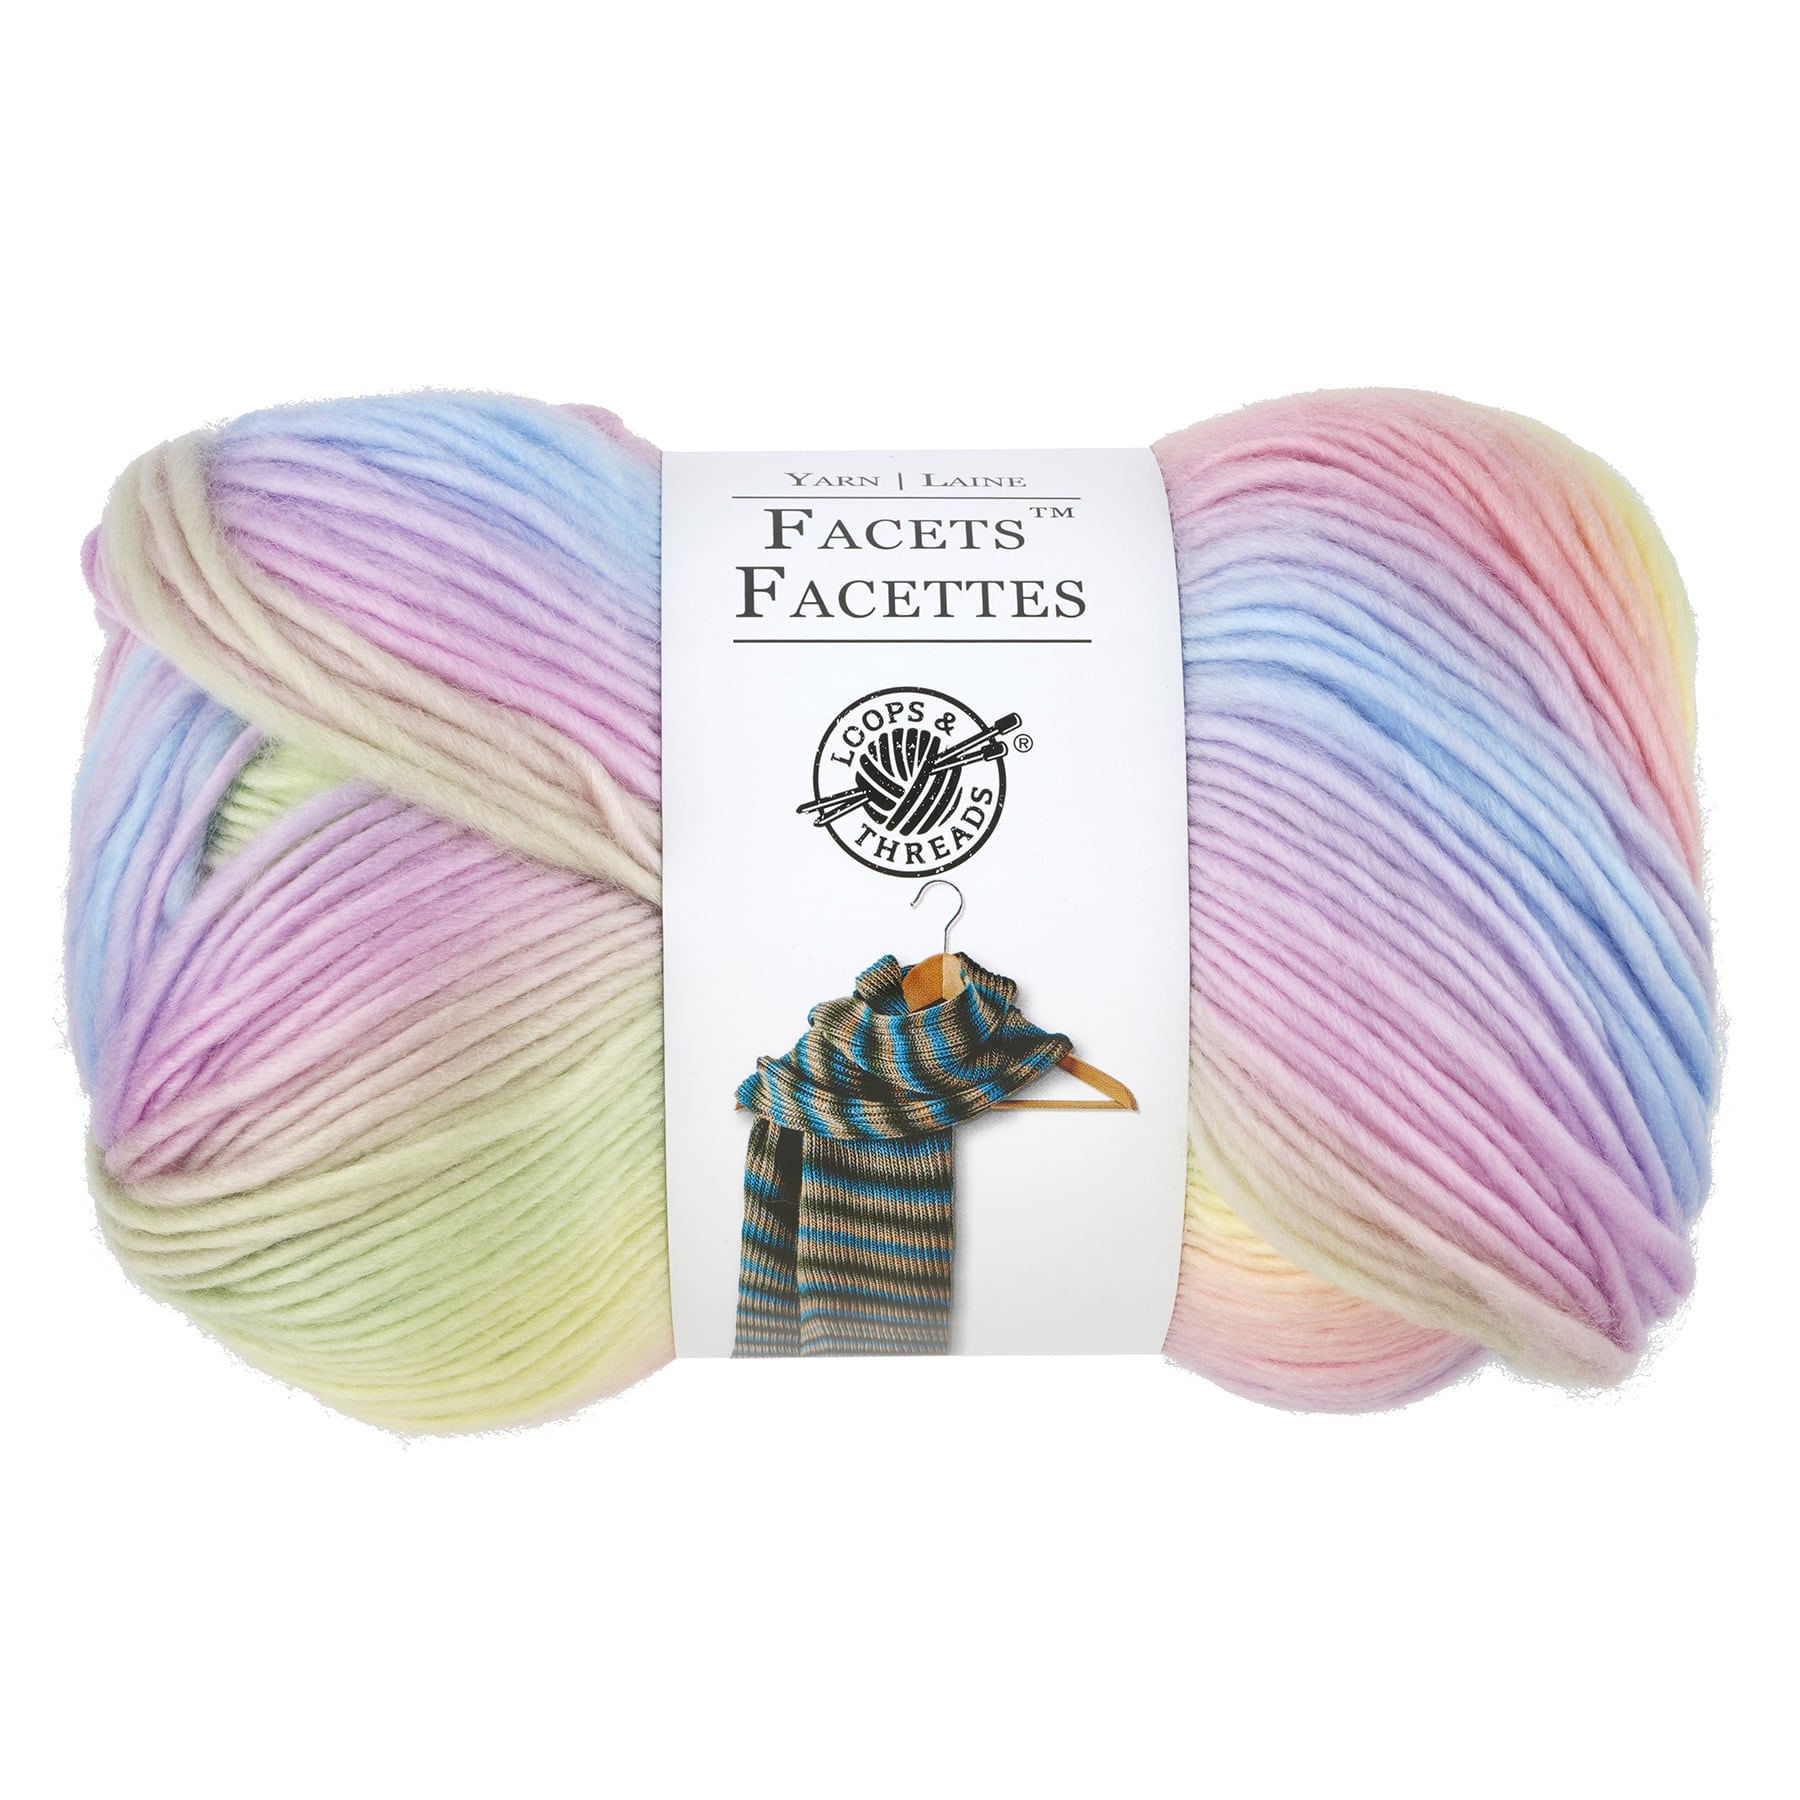 Loops & Threads Facets Yarn - Cotton Candy - 3.5 oz